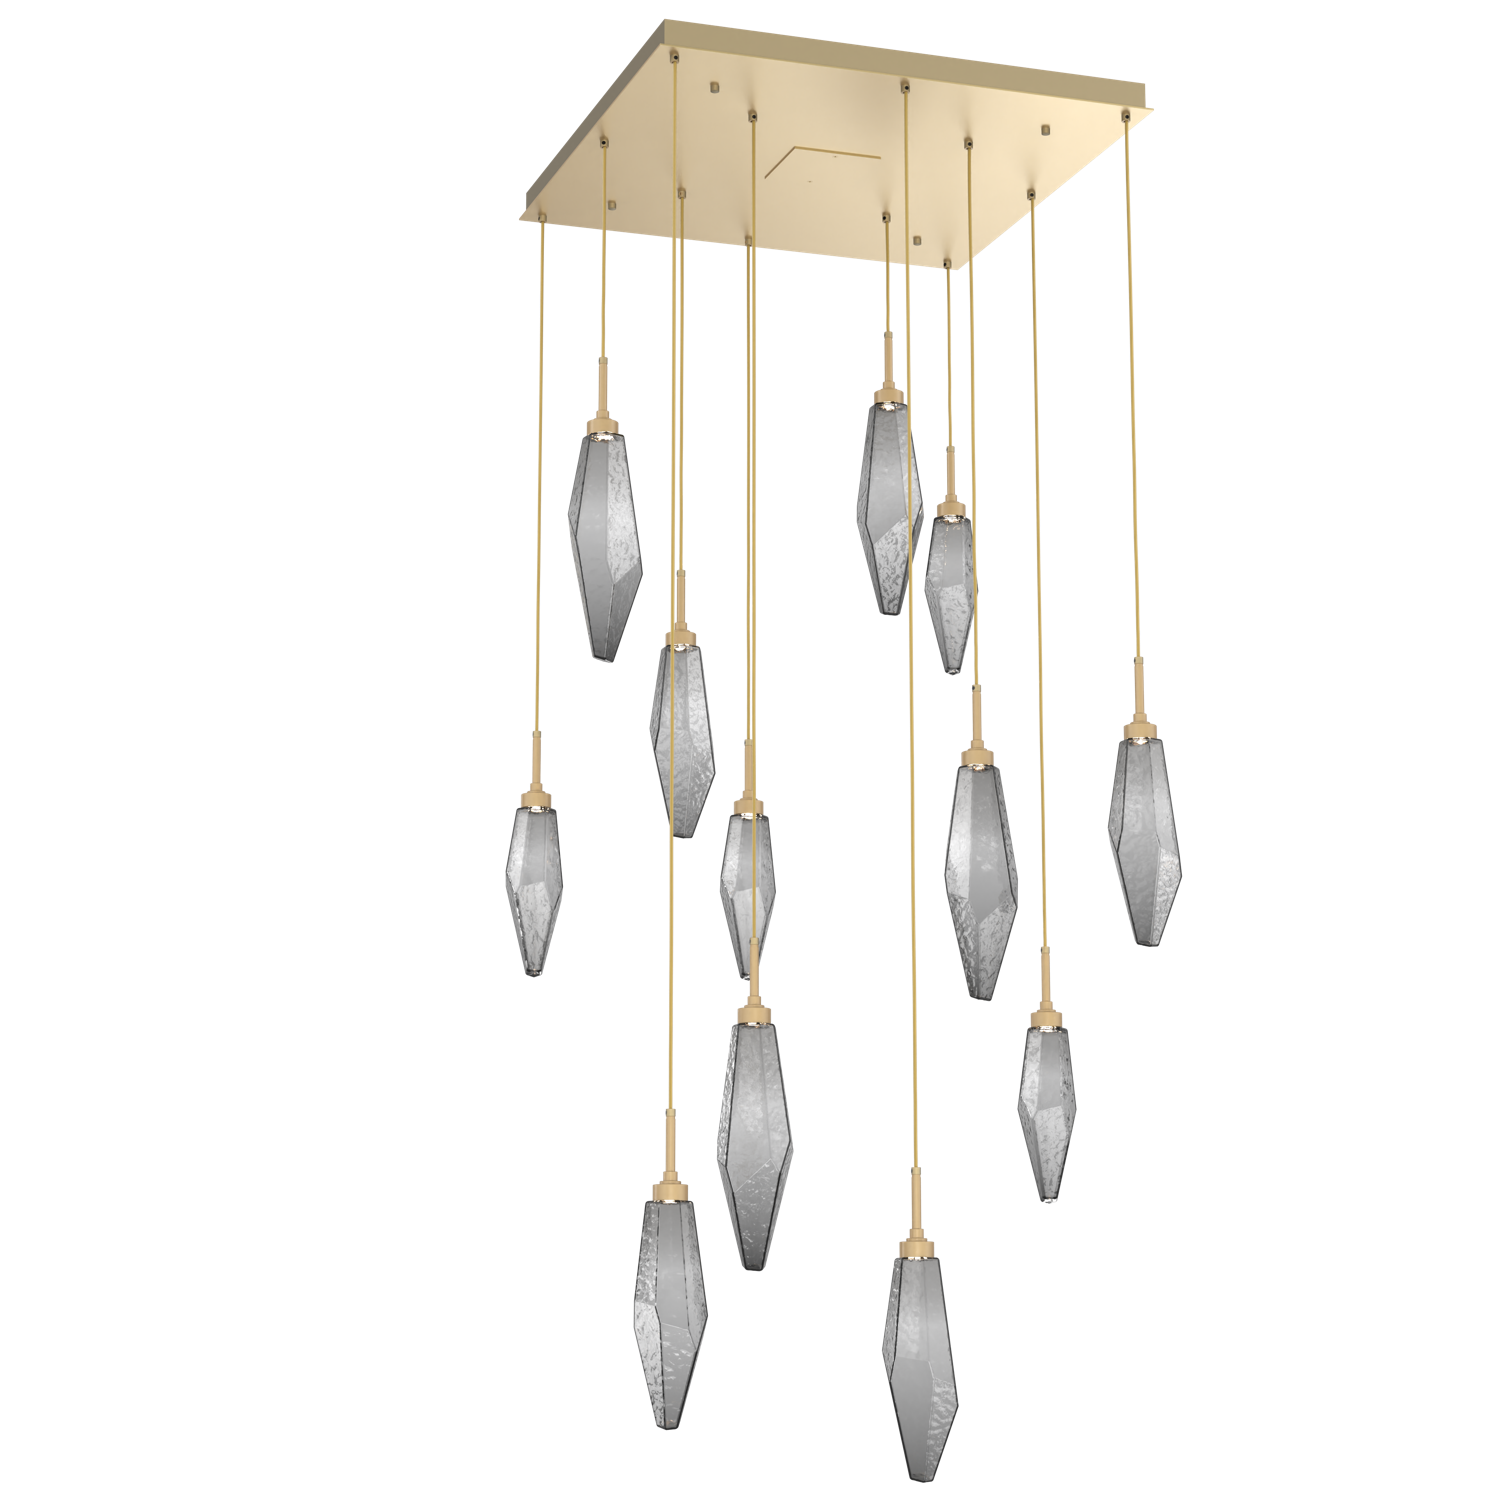 CHB0050-12-GB-CS-Hammerton-Studio-Rock-Crystal-12-light-square-pendant-chandelier-with-gilded-brass-finish-and-chilled-smoke-glass-shades-and-LED-lamping